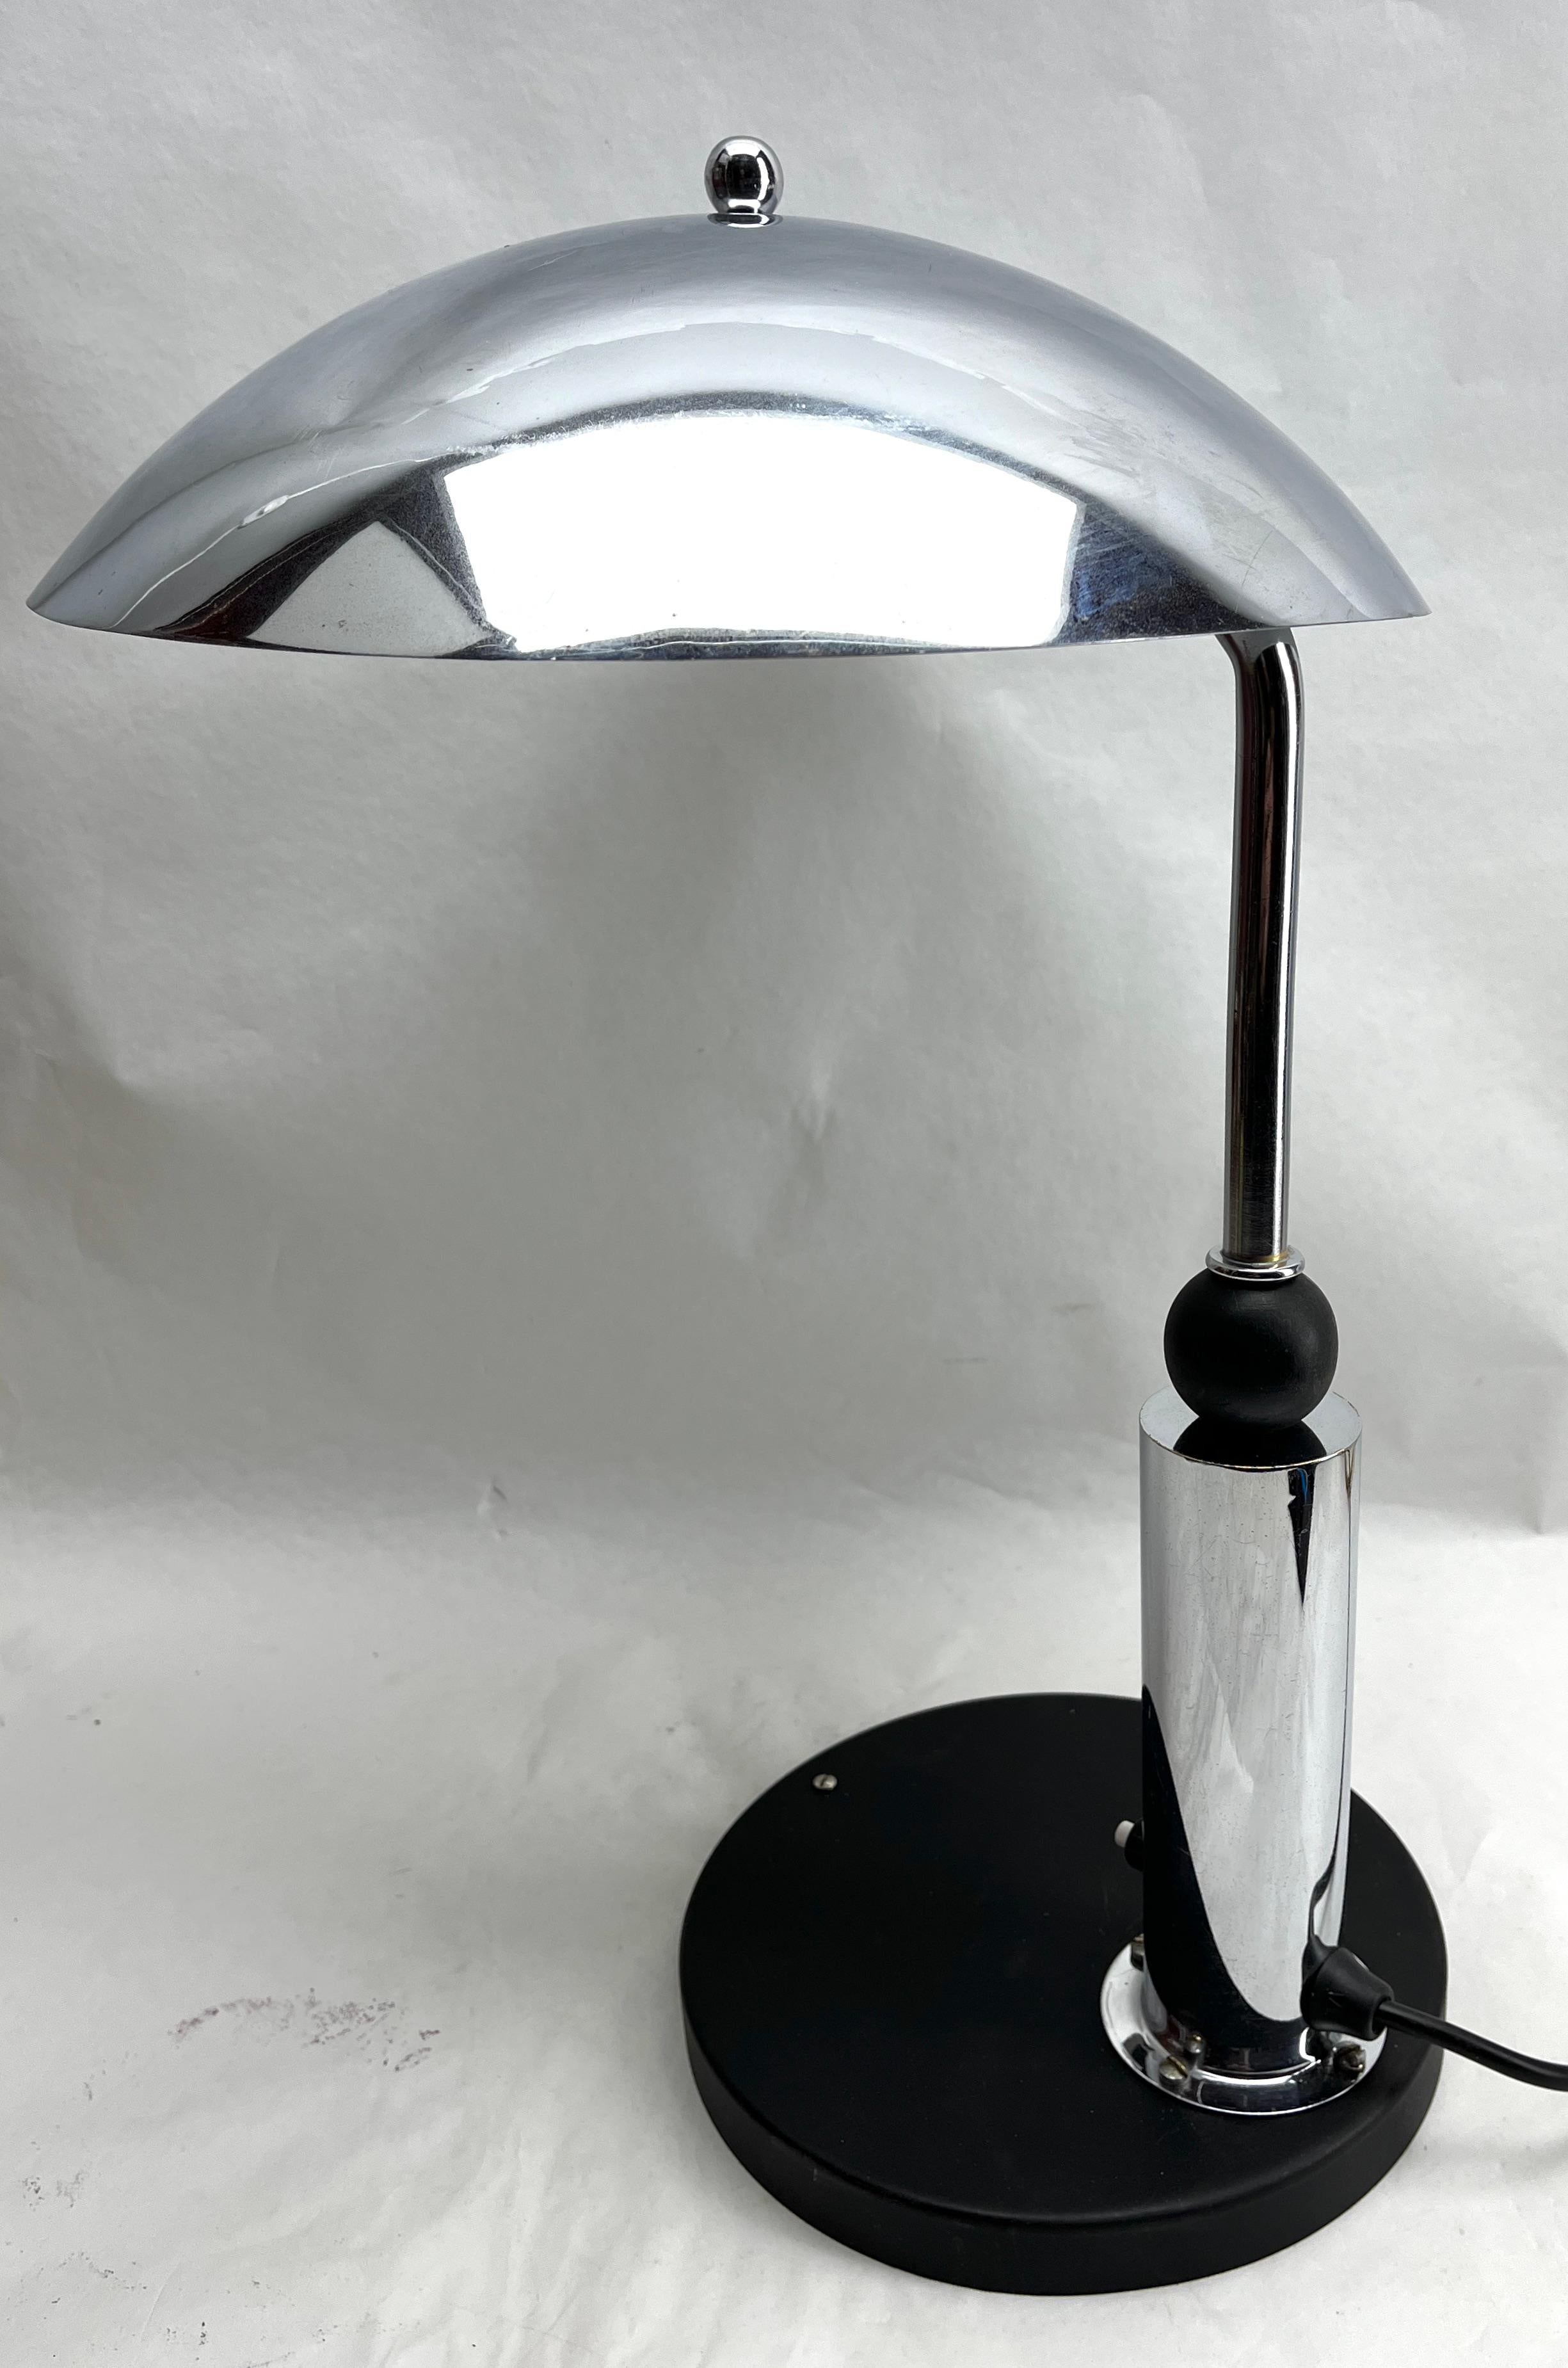  Desk or Side Table Lamp KMD (Daalderop) Tiel Netherlands in Bauhaus style 1930s In Good Condition For Sale In Verviers, BE